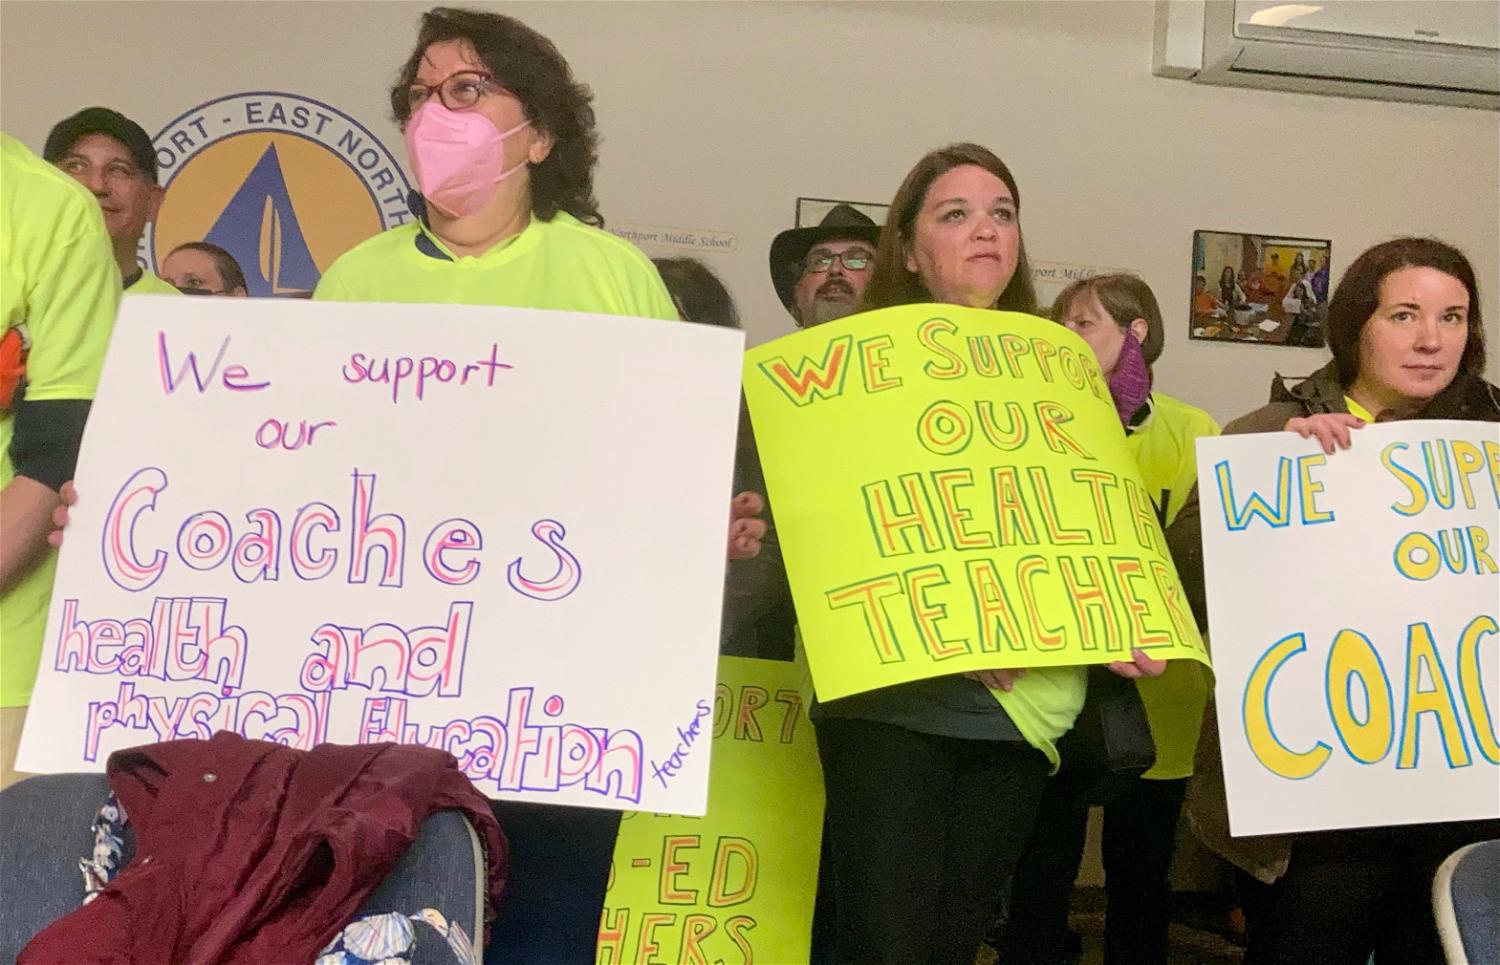 Members of the United Teachers of Northport (UTN) at an April 2022 board of education meeting, where teachers and staff from the district showed up in solidarity in light of allegations against the district’s athletic director that have yet to be made public.